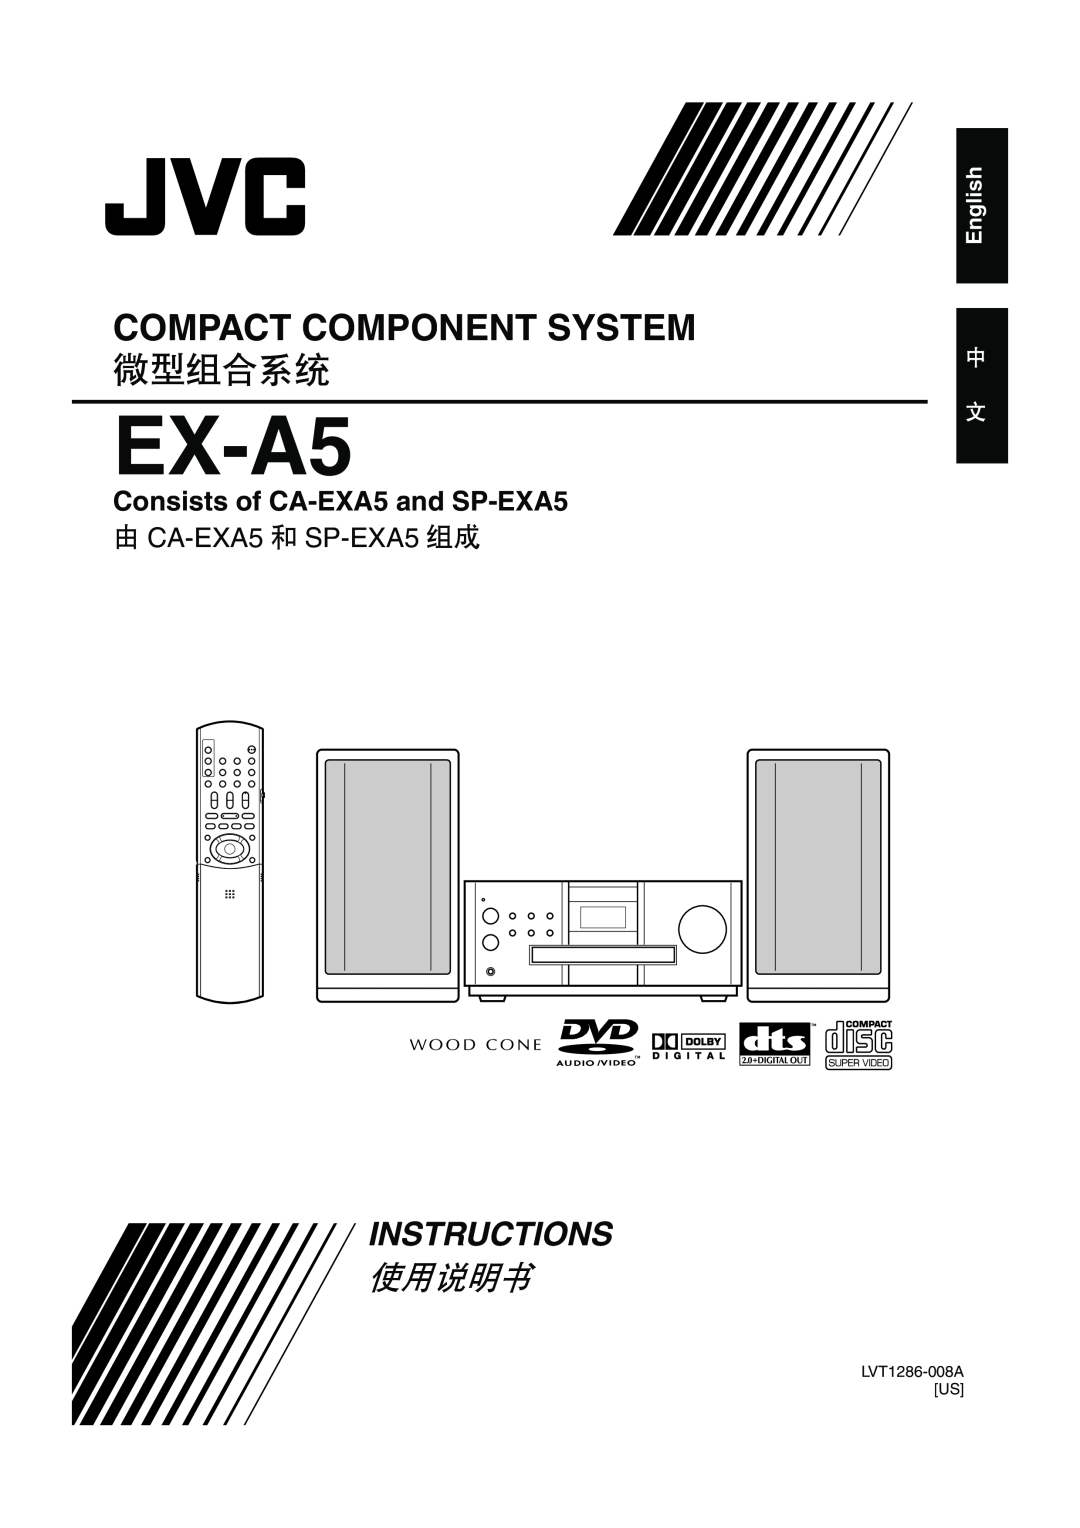 JVC EX-A5 manual Consists of CA-EXA5and SP-EXA5, English, Compact Component System, 微型组合系统, Instructions, 使用说明书 